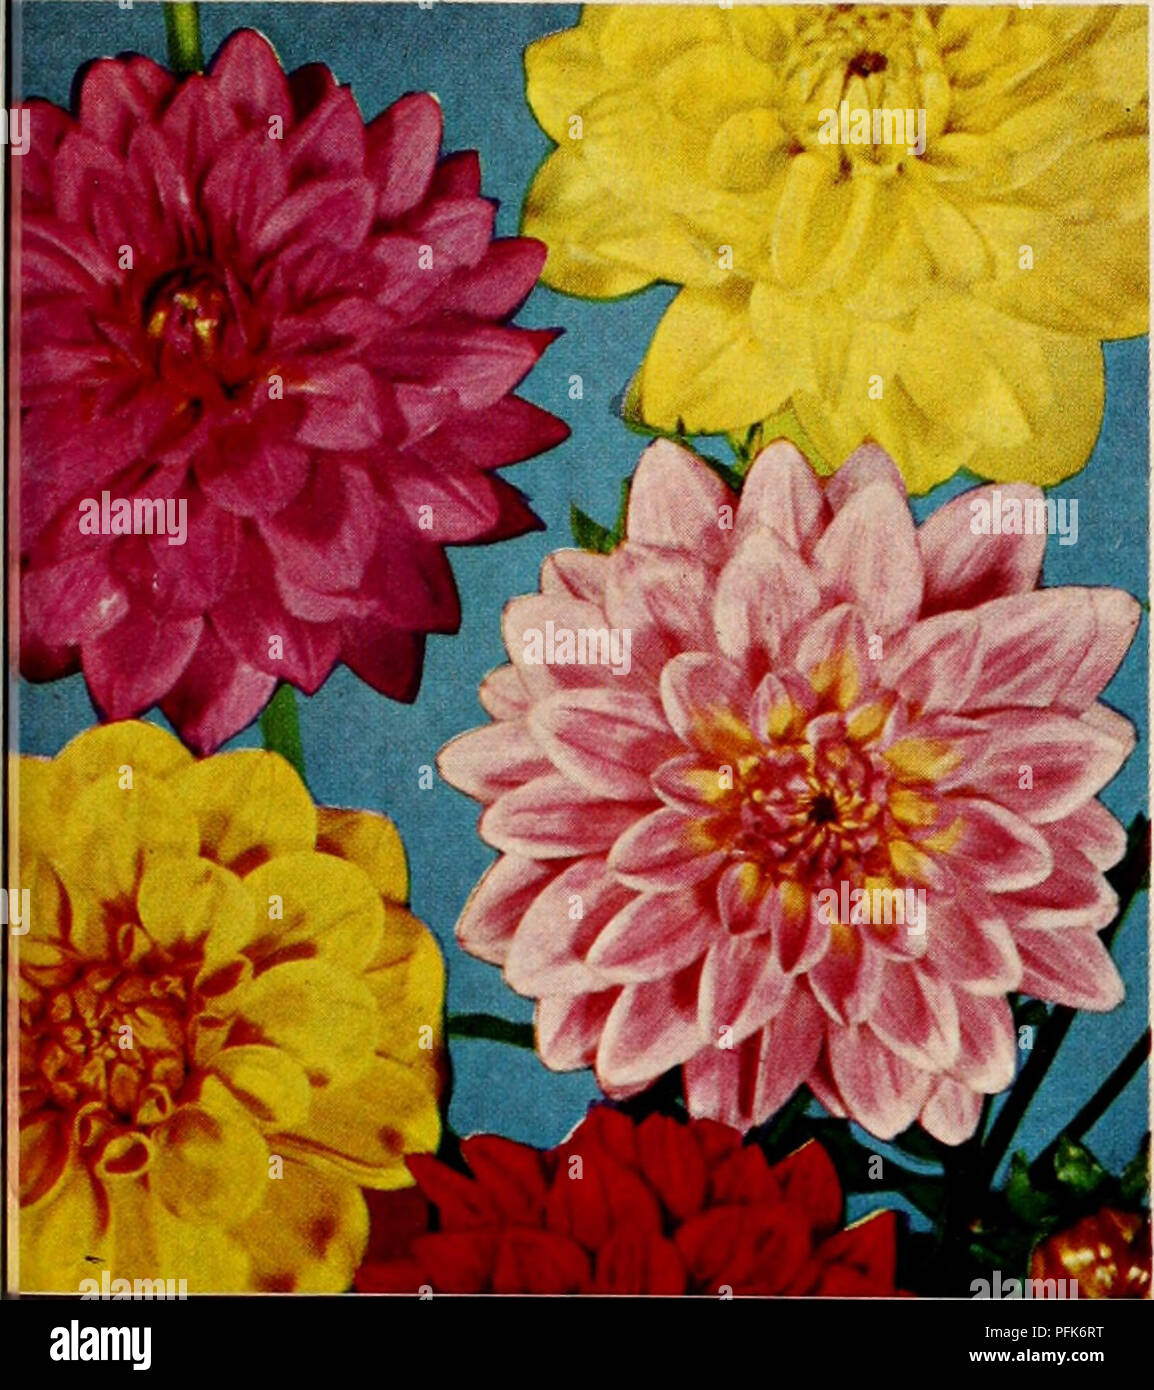 . Dahlias : over 75 varieties offered in this special sales folder. Nurseries (Horticulture) Catalogs; Flowers Catalogs; Dahlias Catalogs; Bulbs (Plants) Catalogs. VAMPYR ATOMIC VICTORY MAID GOOD EARTH. Outflow er DAHLIAS Best Cutting Types Ever Introduced The collection offered here includes some of the best cutflower varieties we have ever grown. Each plant will produce up to several hundred blooms each season, leaving plenty of color in the garden even after picking a big bouquet for the house! Remem- ber to cut them in the cool of the day, leaving them in water over- night, or for a period Stock Photo